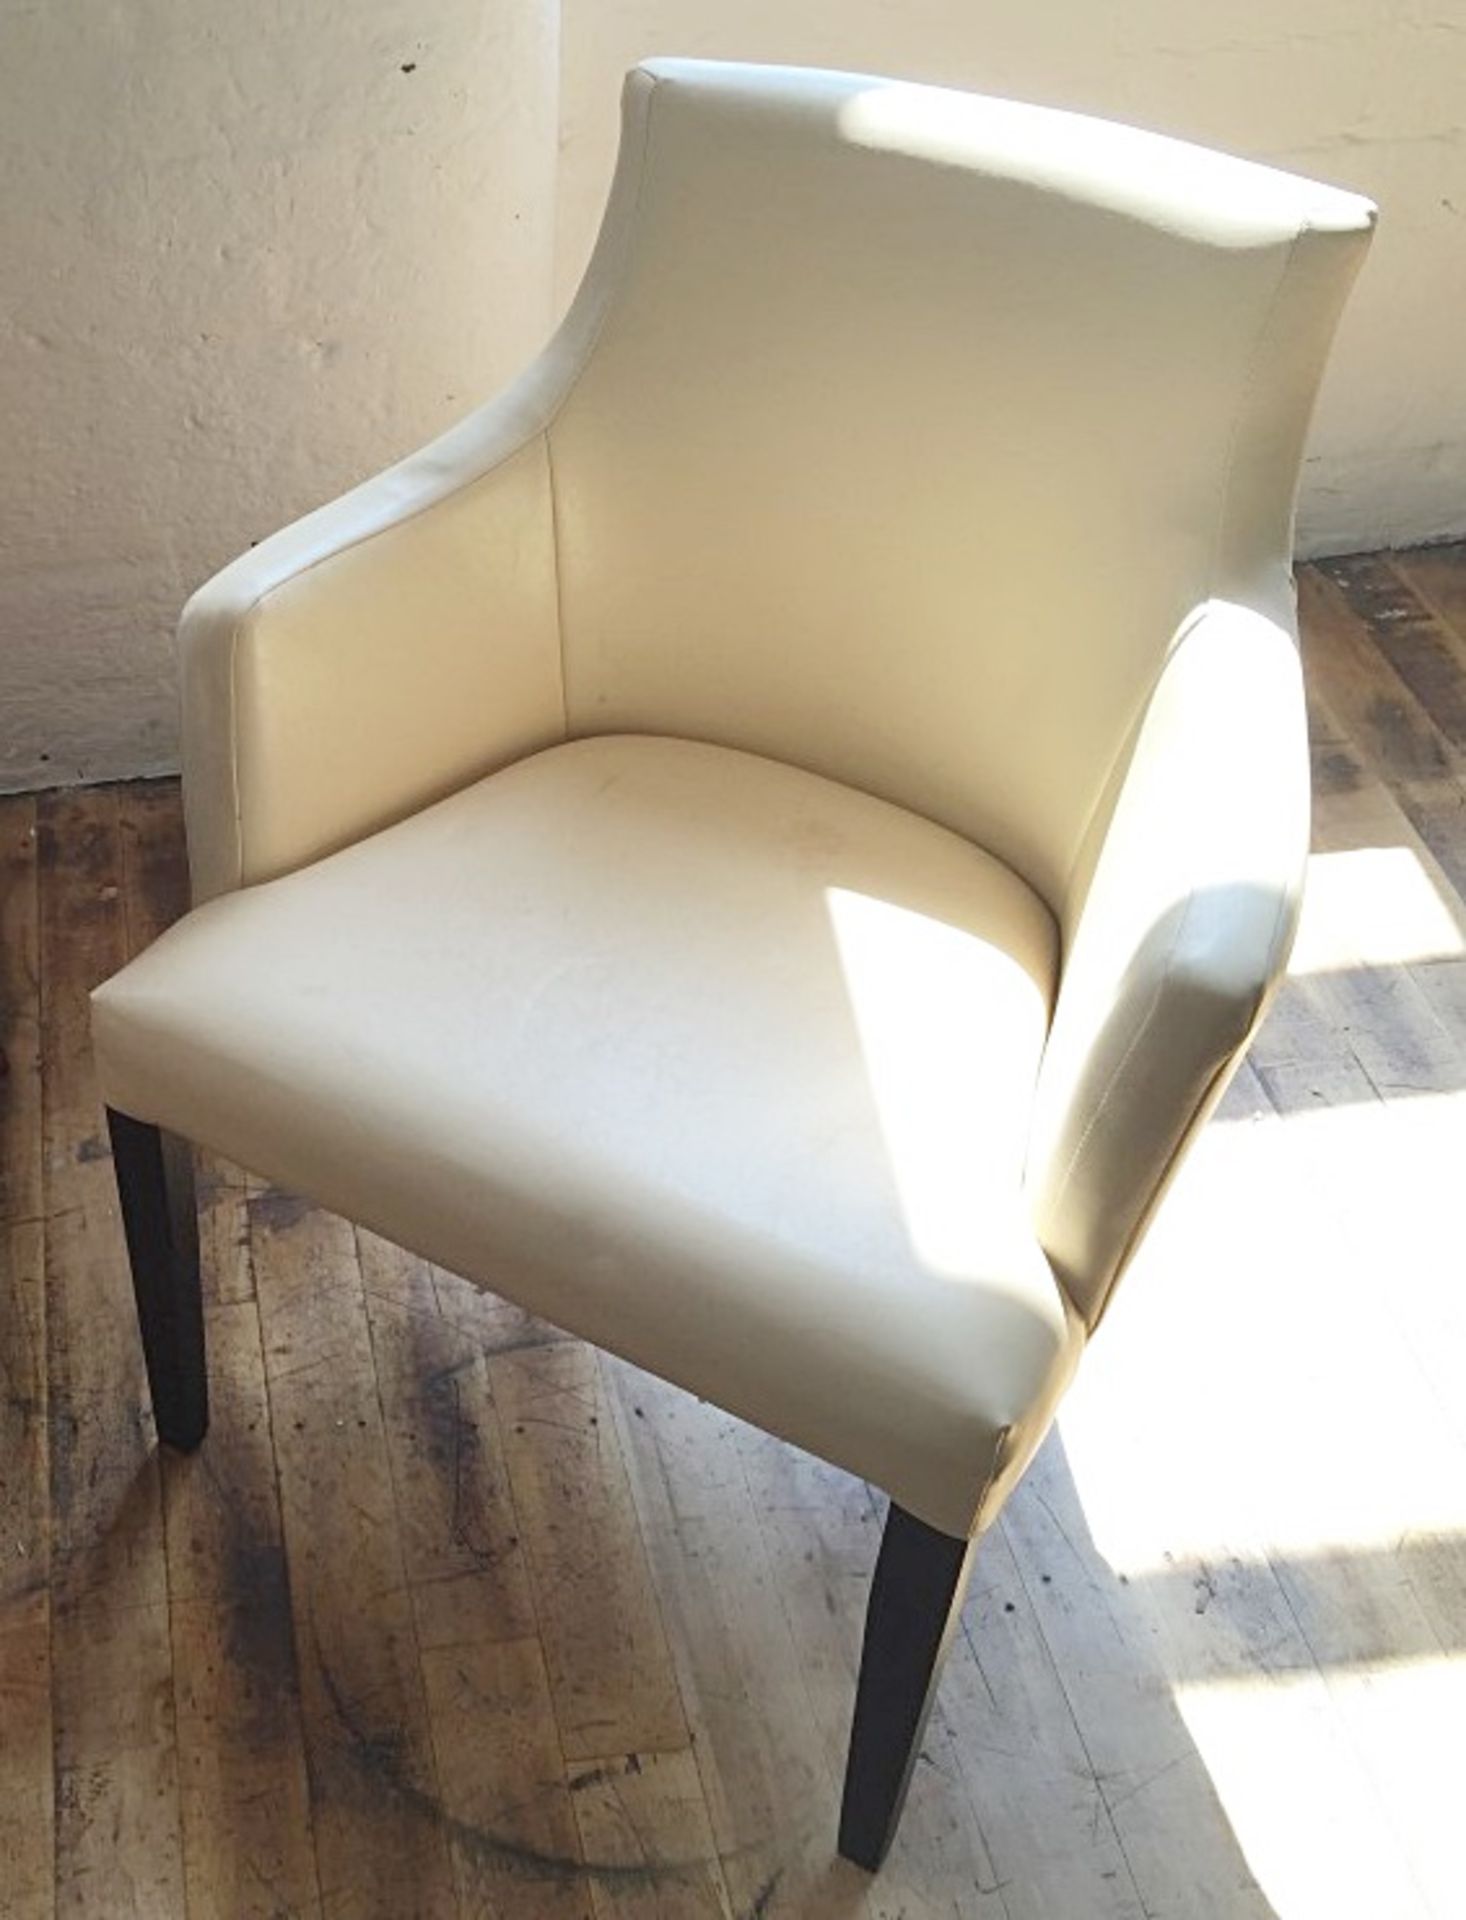 1 x Faux Leather Chair In Cream - Ref: NDE016B - CL122 - Location: Bury BL8 All furniture items - Image 3 of 4